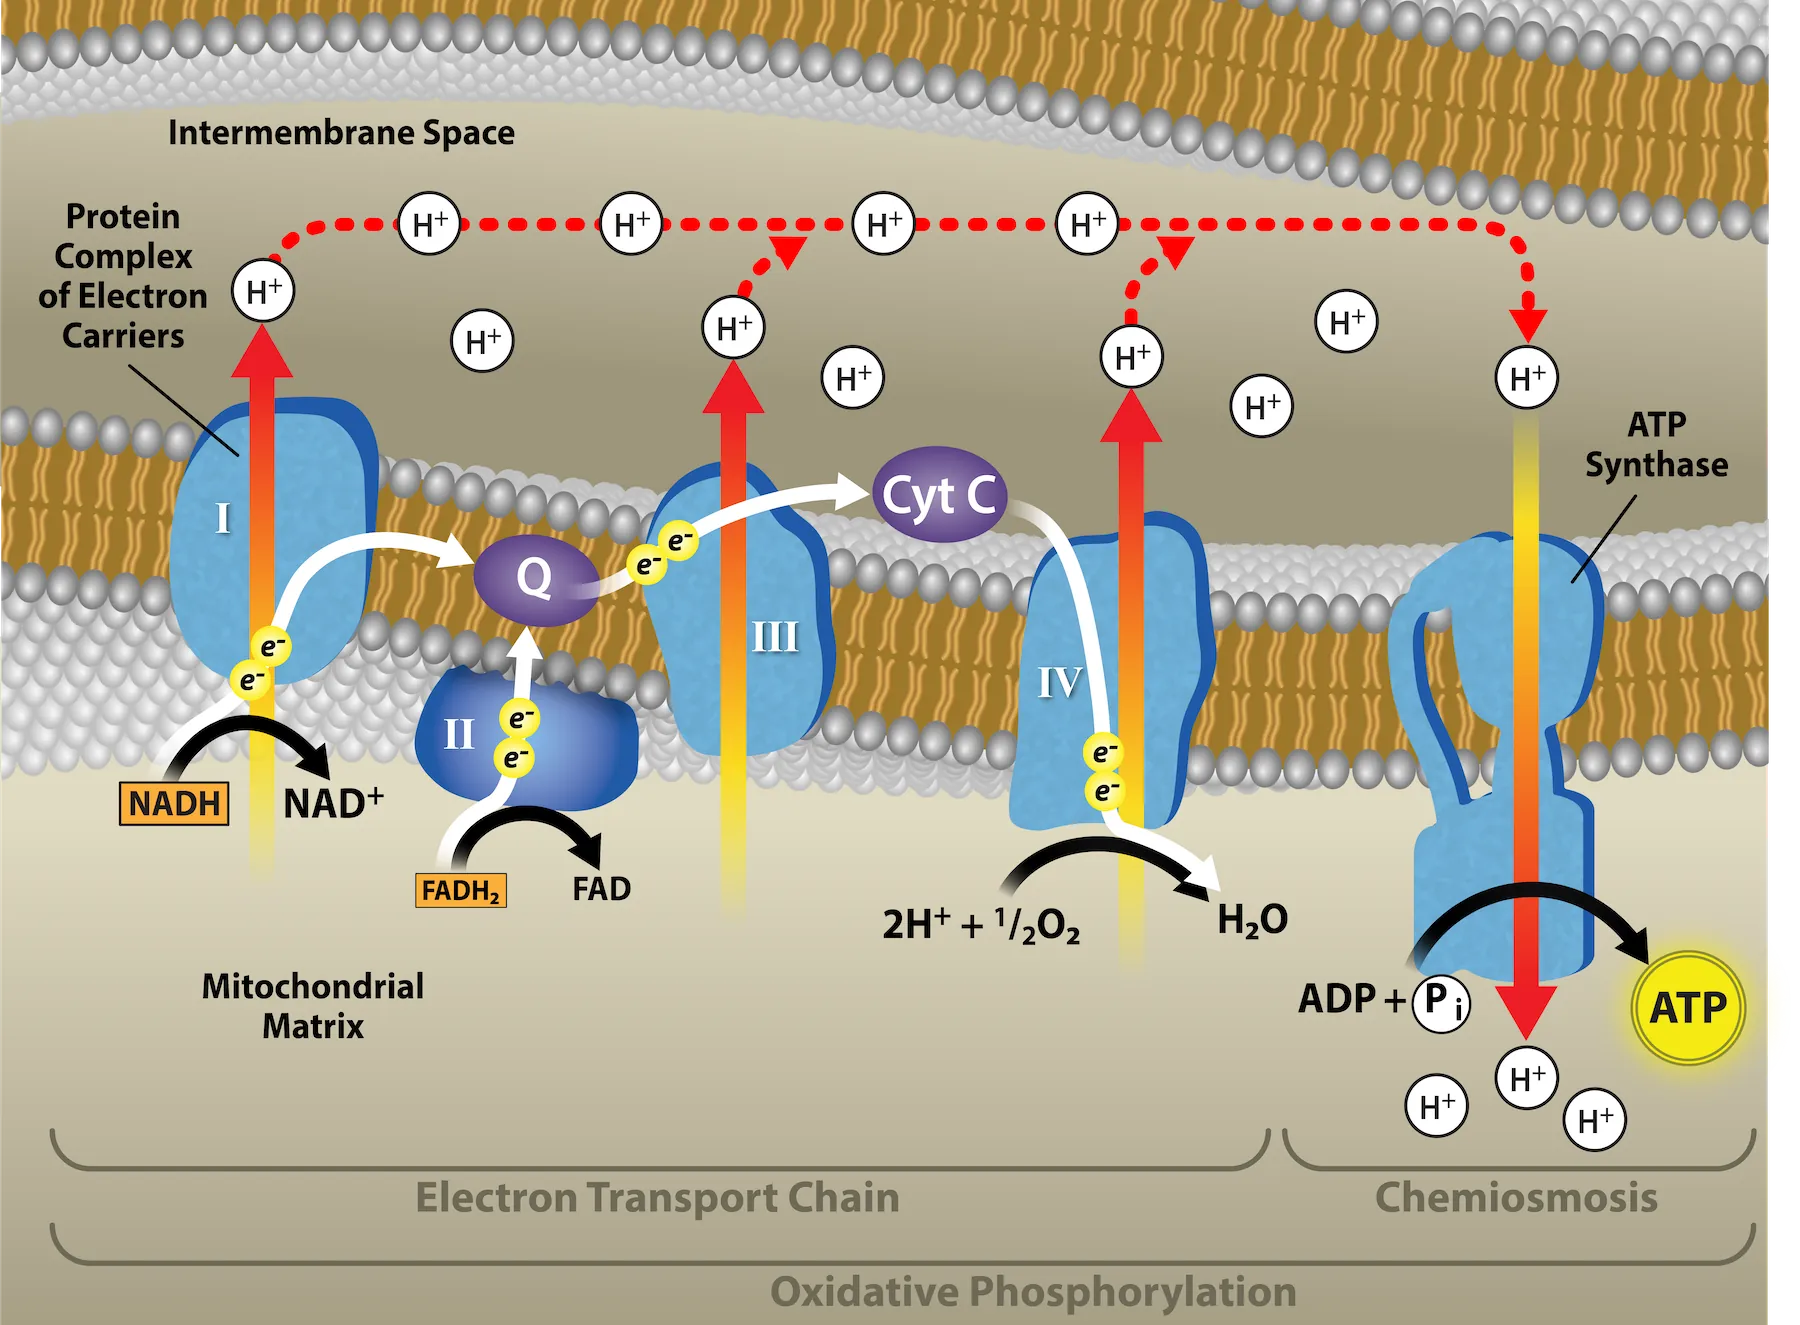 This illustration shows the electron transport chain, the A T P synthase enzyme embedded in the inner mitochondrial membrane, and chemiosmosis occurring in the mitochondrial matrix.  The electron transport chain oxidizes substrates and, in the process, pumps protons into the intermembrane space. A T P synthase allows protons to leak back into the matrix and synthesizes A T P in chemiosmosis.